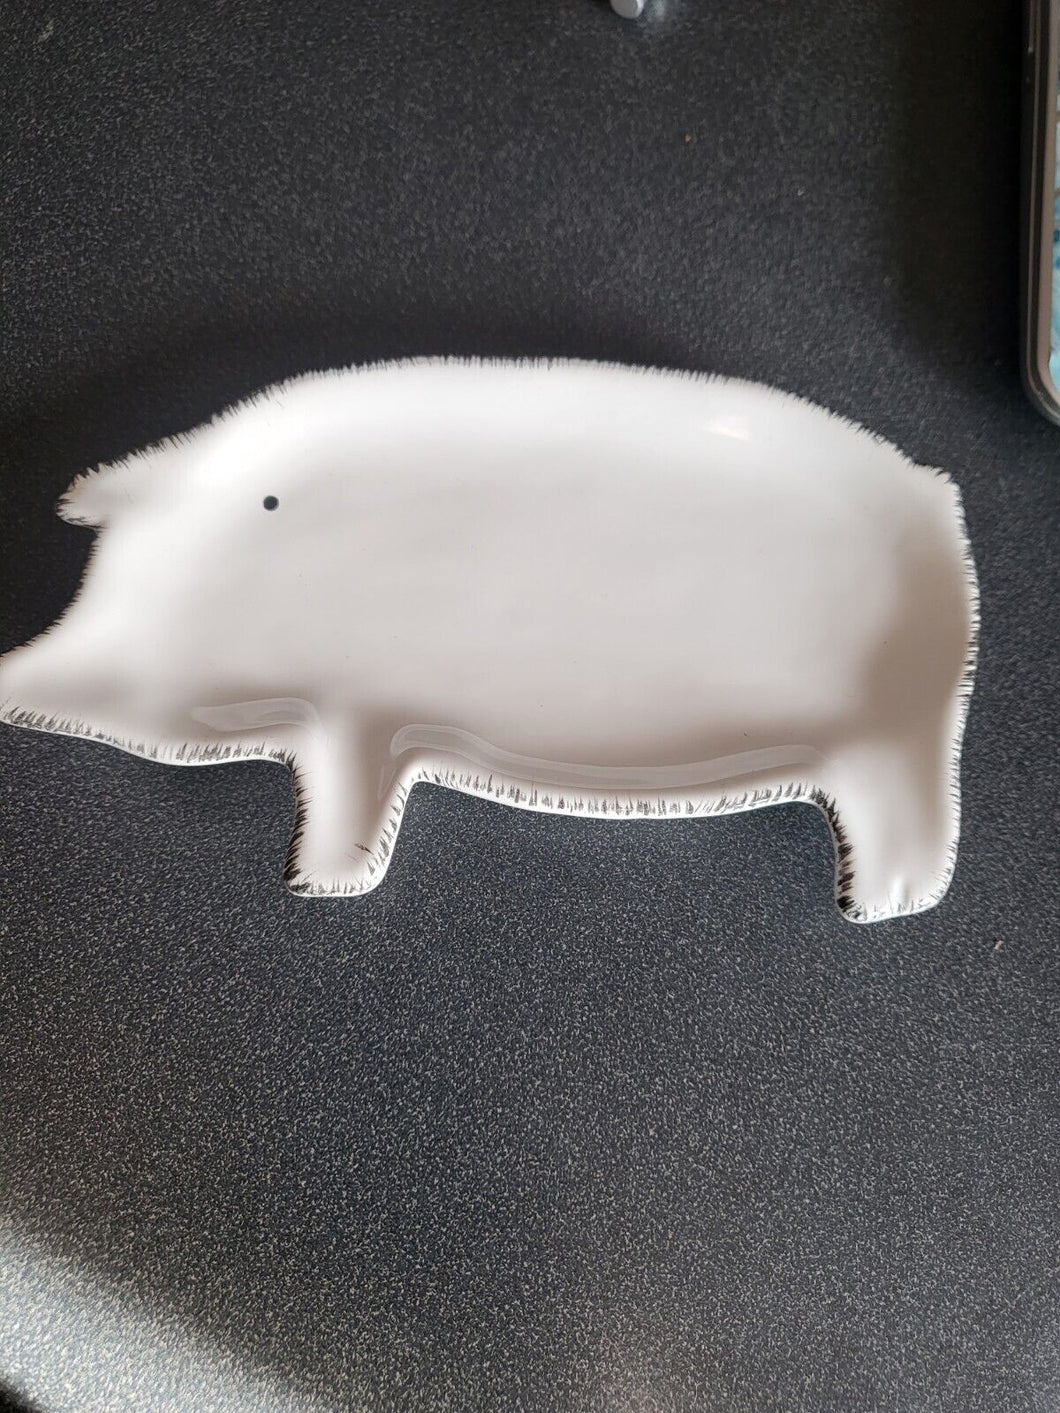 Pig Spoon Rest